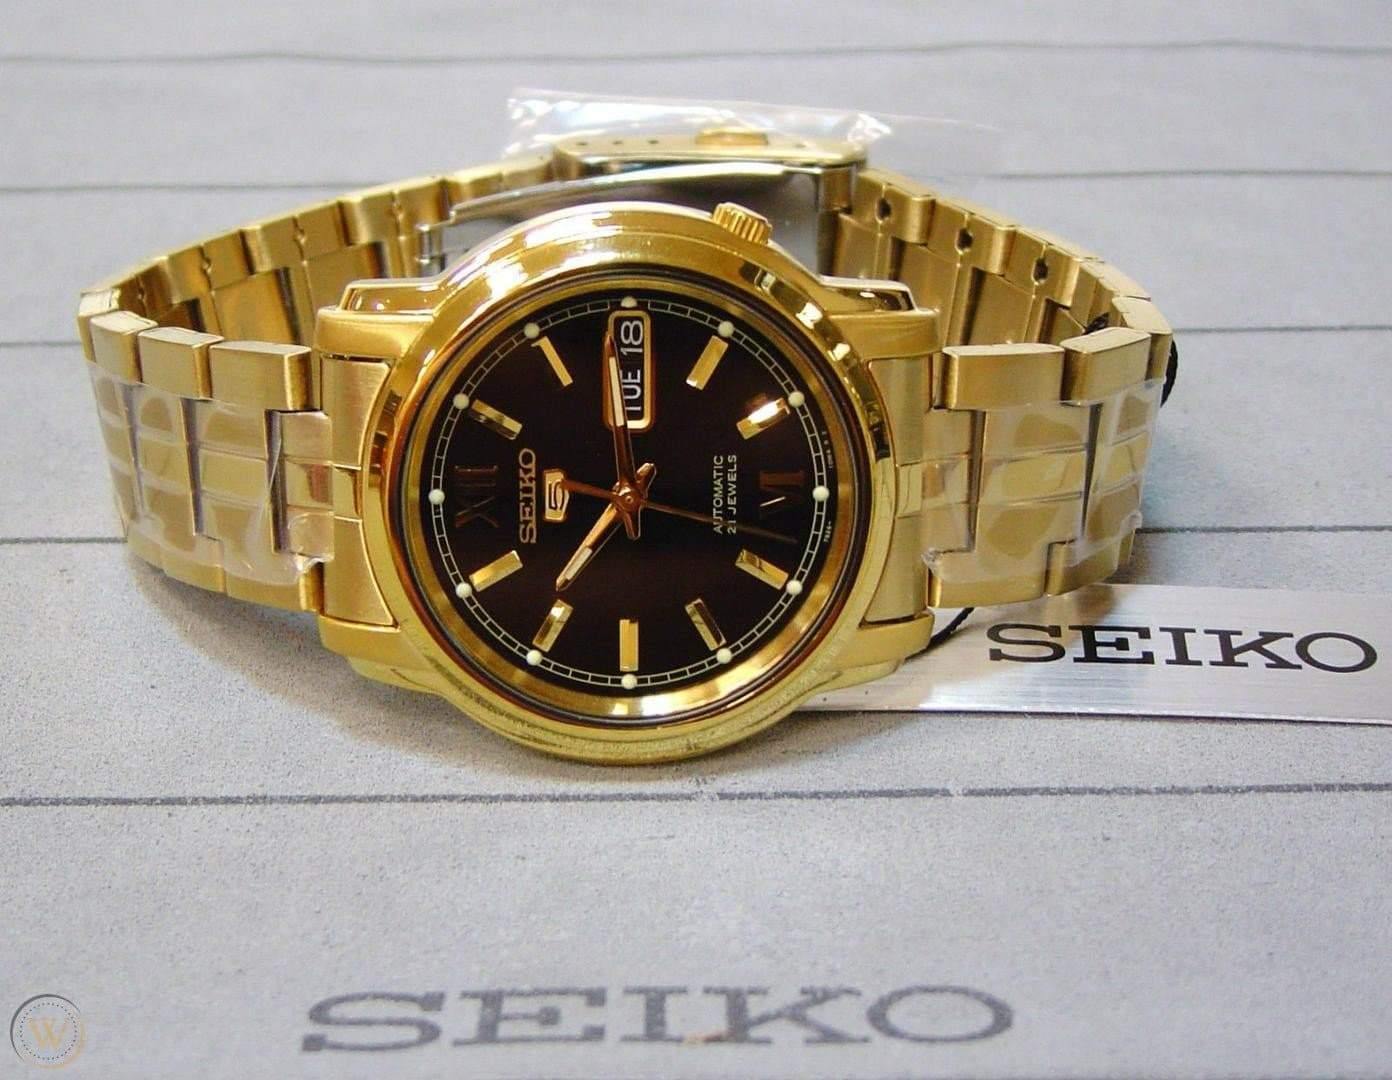 Seiko 5 Classic Men's Size Black Dial Gold Plated Stainless Steel Strap Watch SNKK86K1 - Prestige